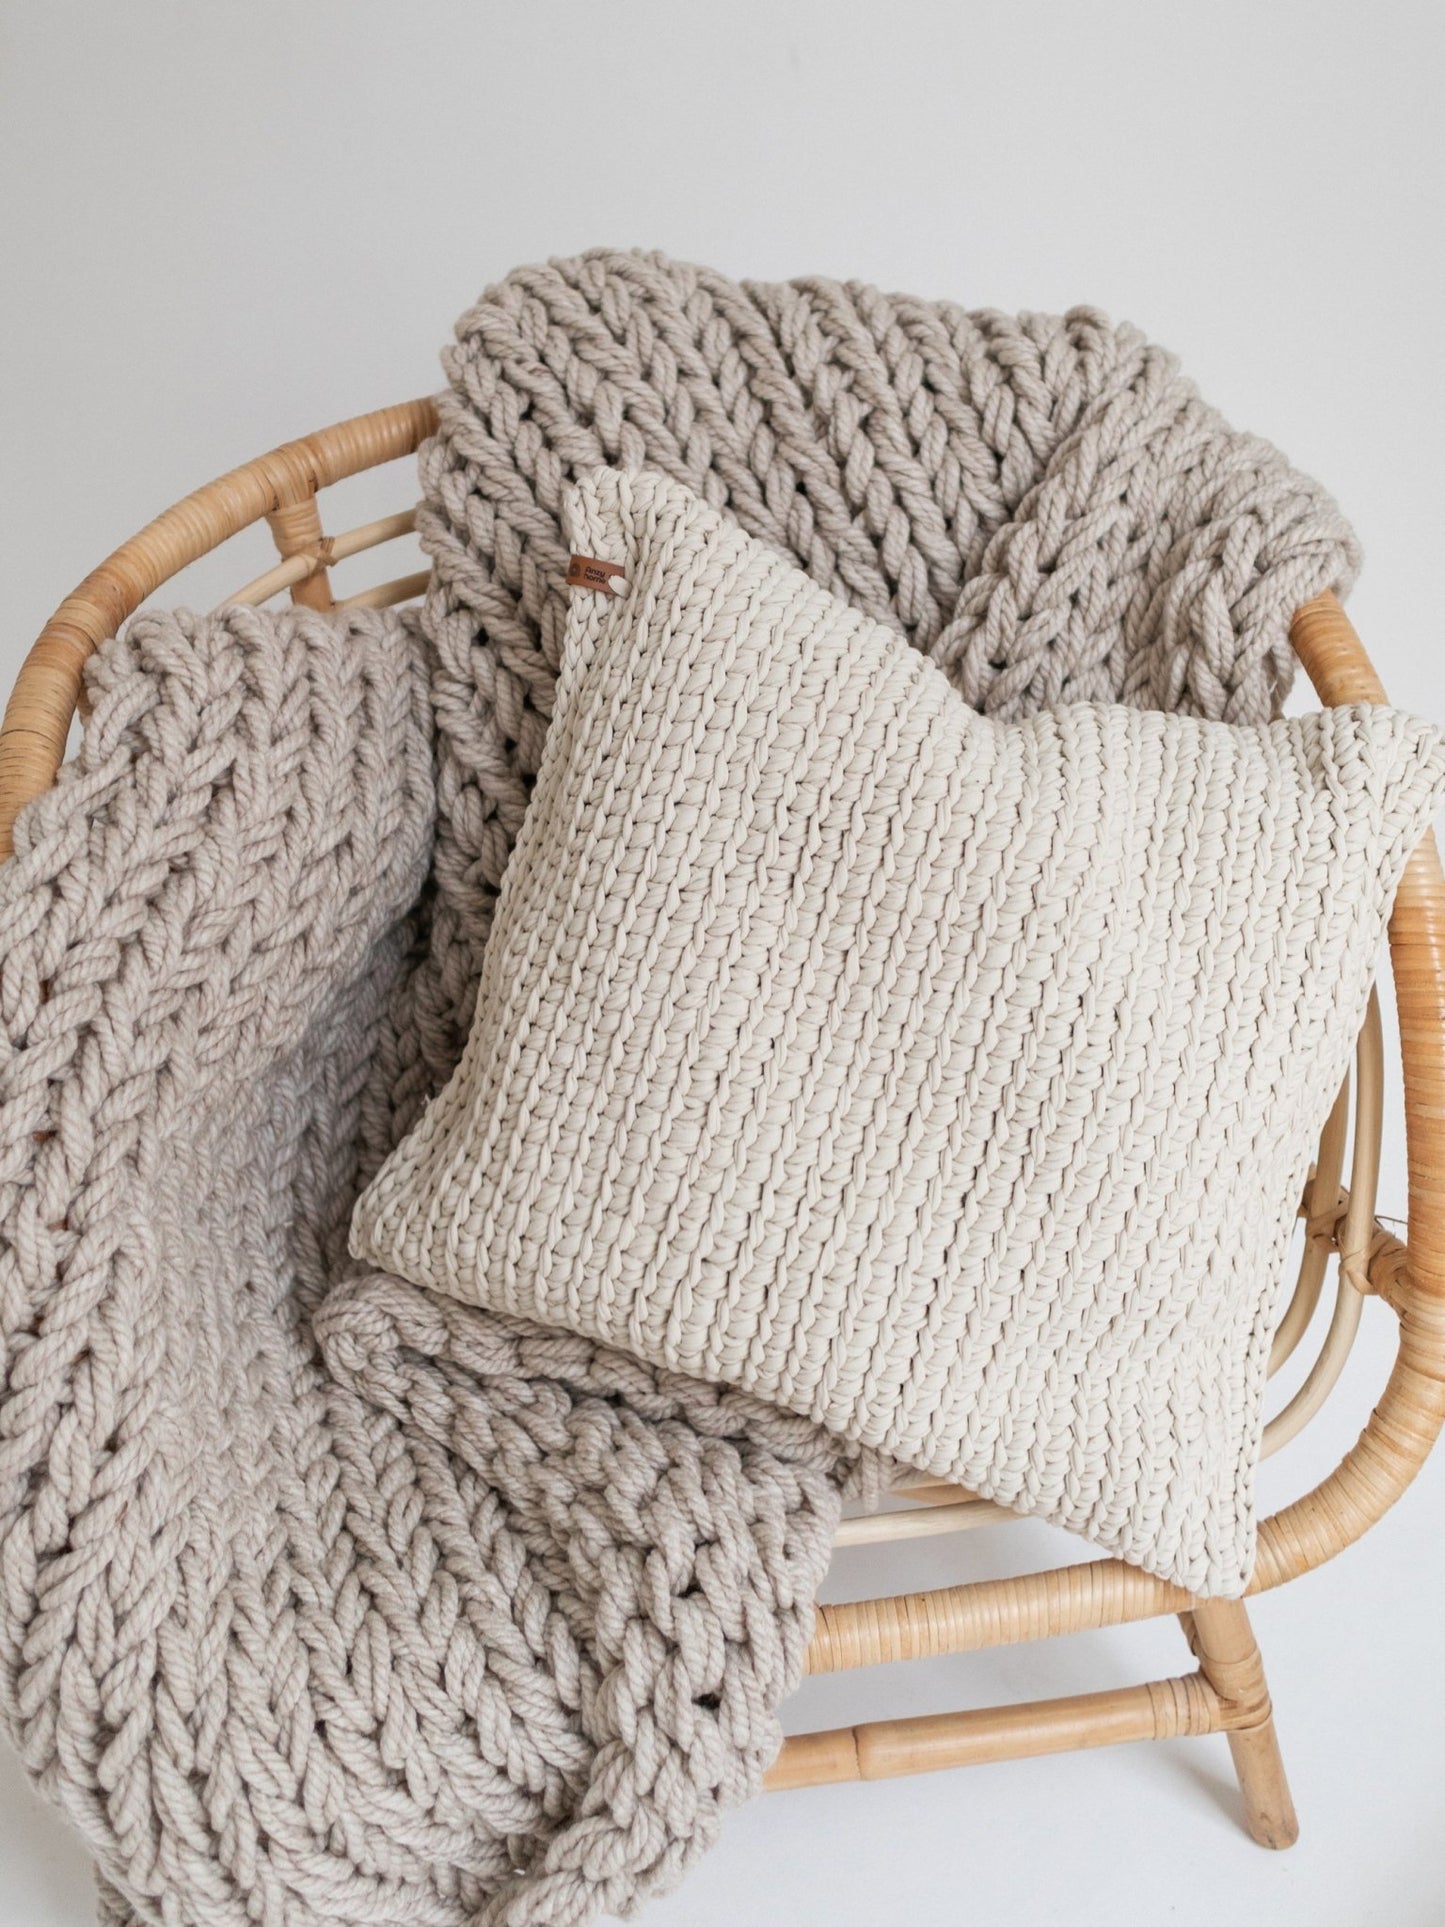 TEXTURED HANDKNIT PILLOW IVORY 20” - The Modern Heritage